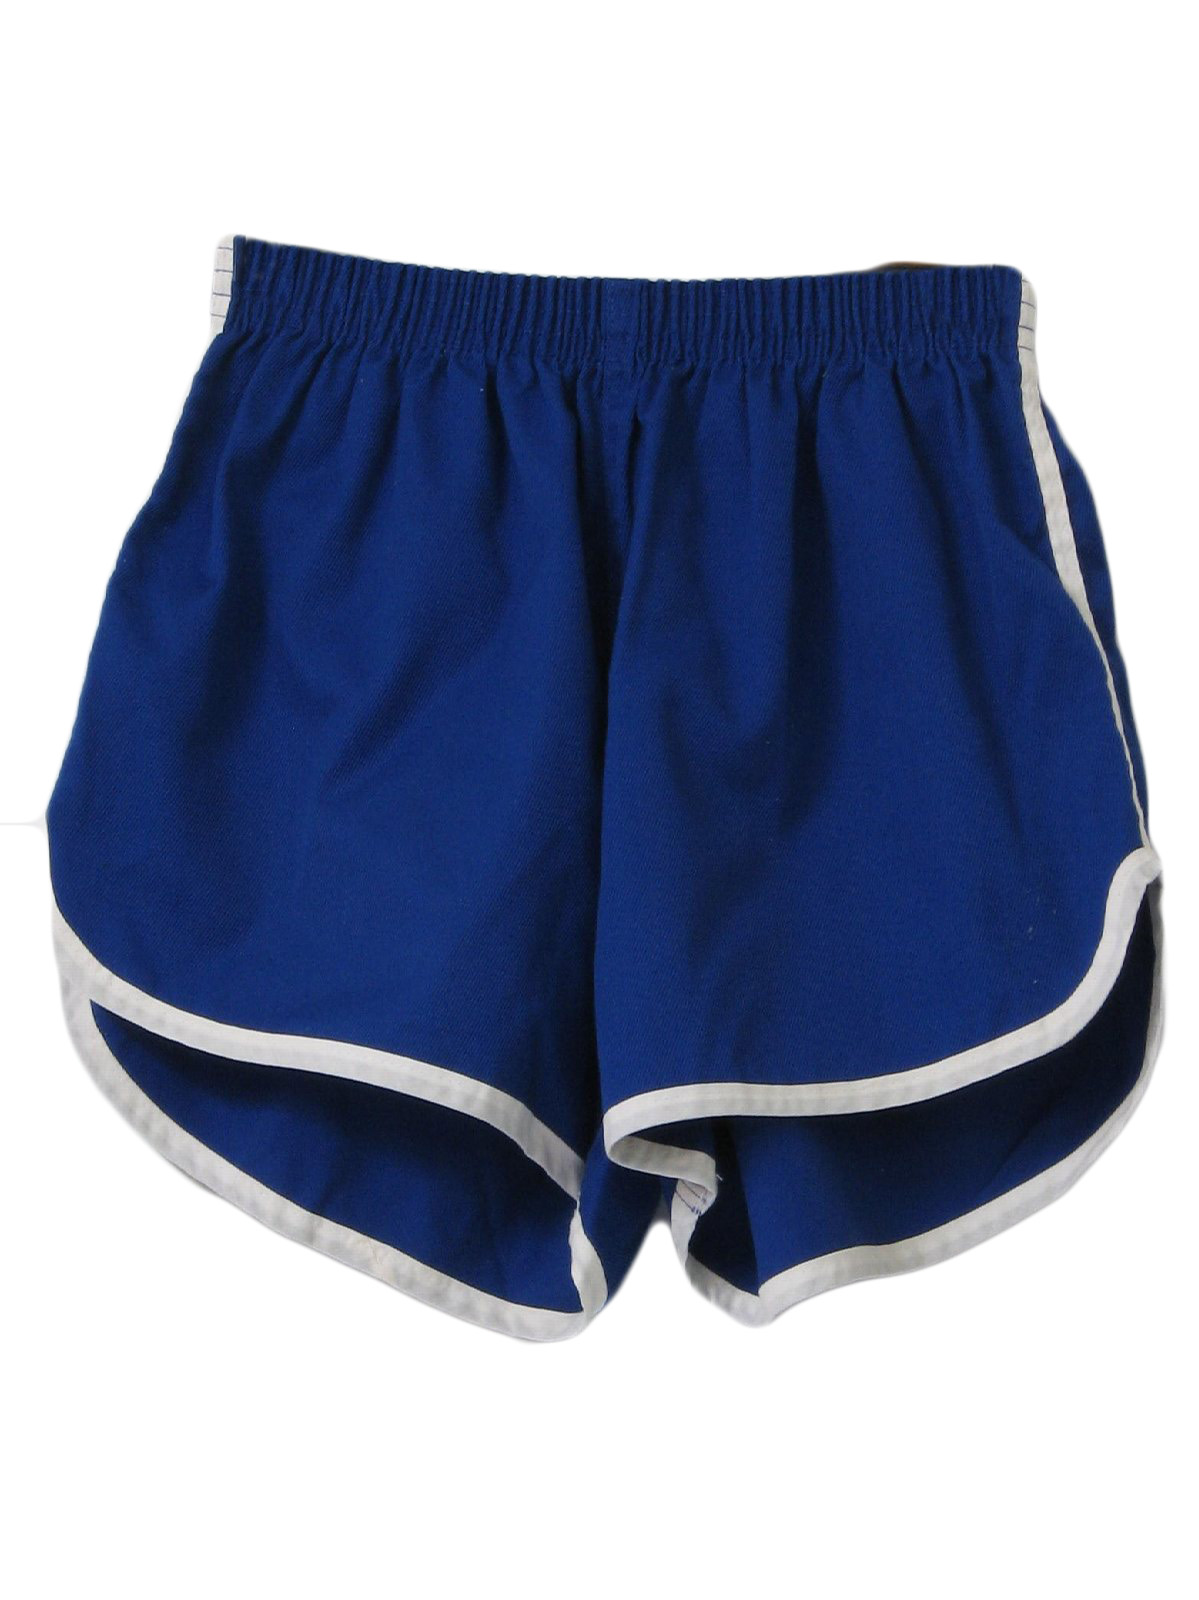 1980's Shorts (Missing Label): 80s -Missing Label- Mens blue and white ...